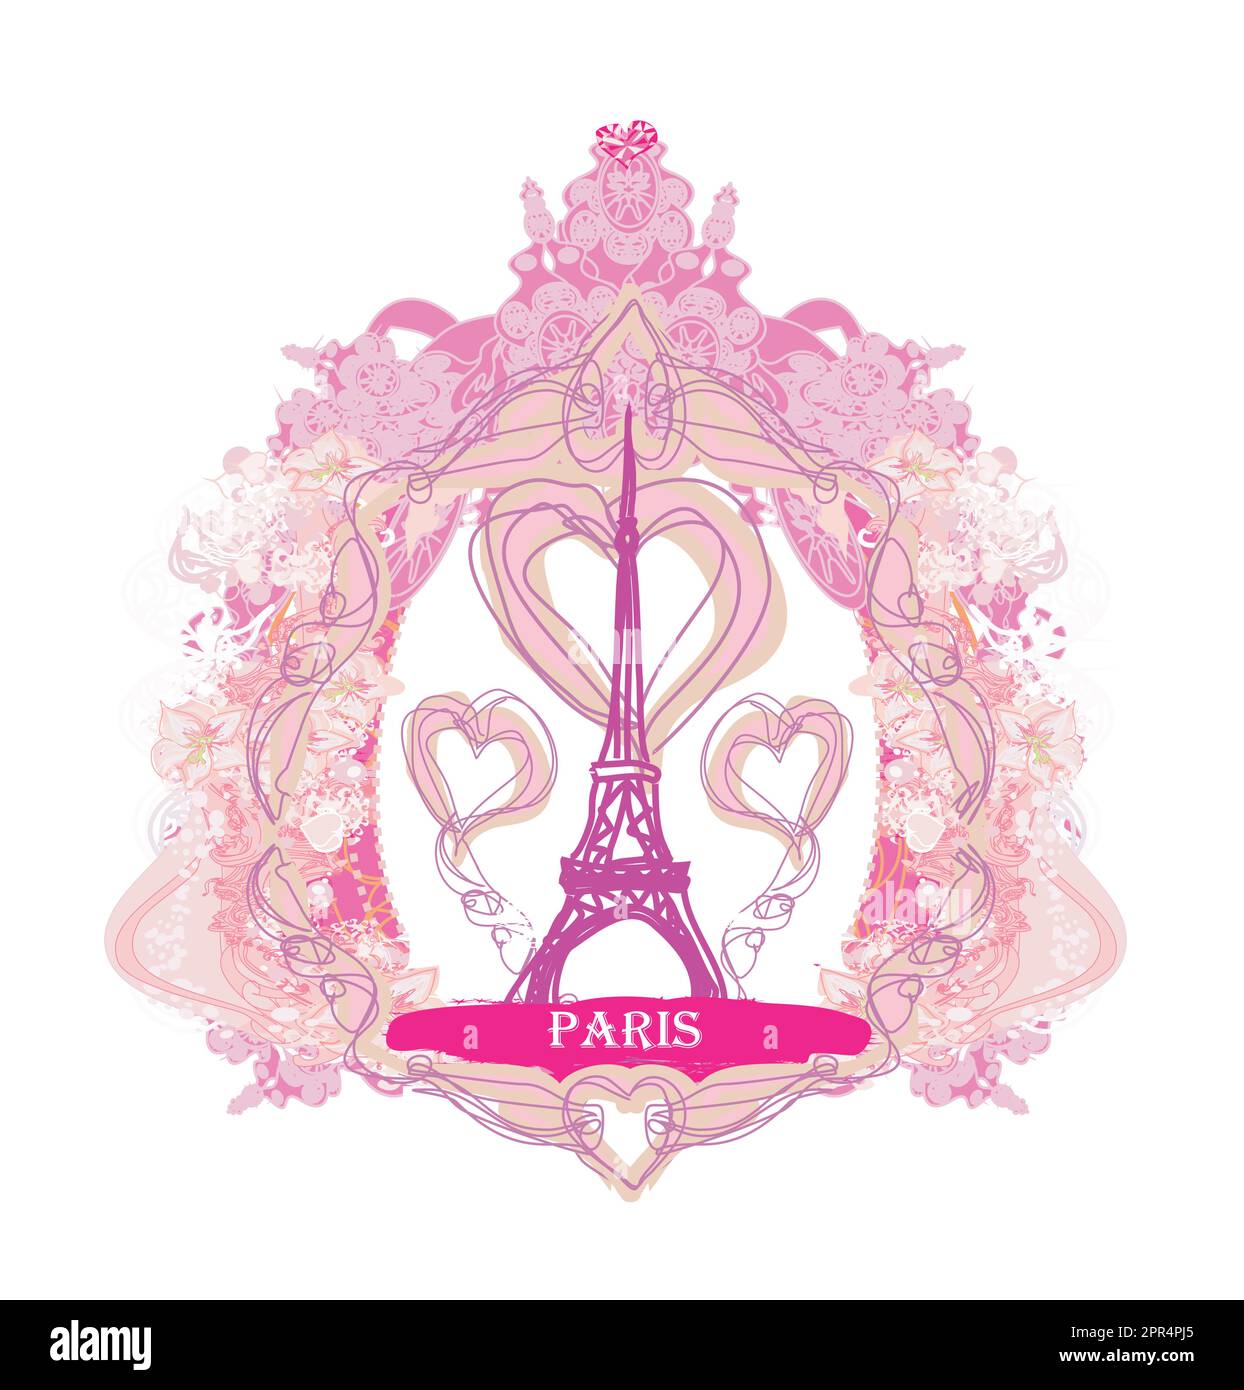 Eiffel tower artistic card, decorative floral banner Stock Vector